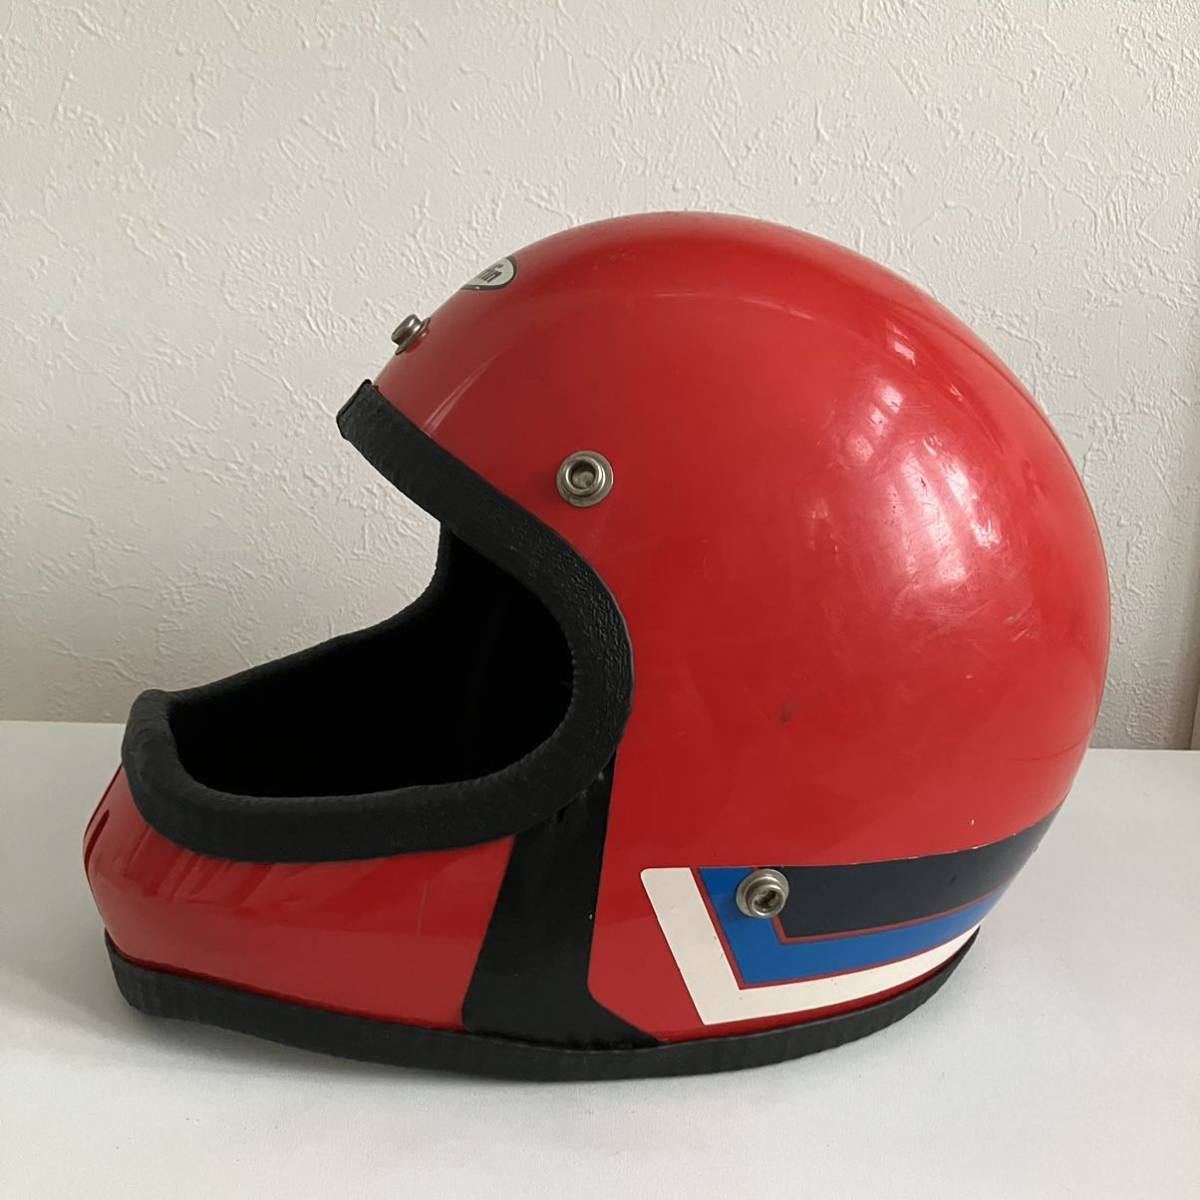  vintage helmet *griffin XS size 70 period rare full-face Moto cross bike red color Moto hell old car child griffin MOTORS INC